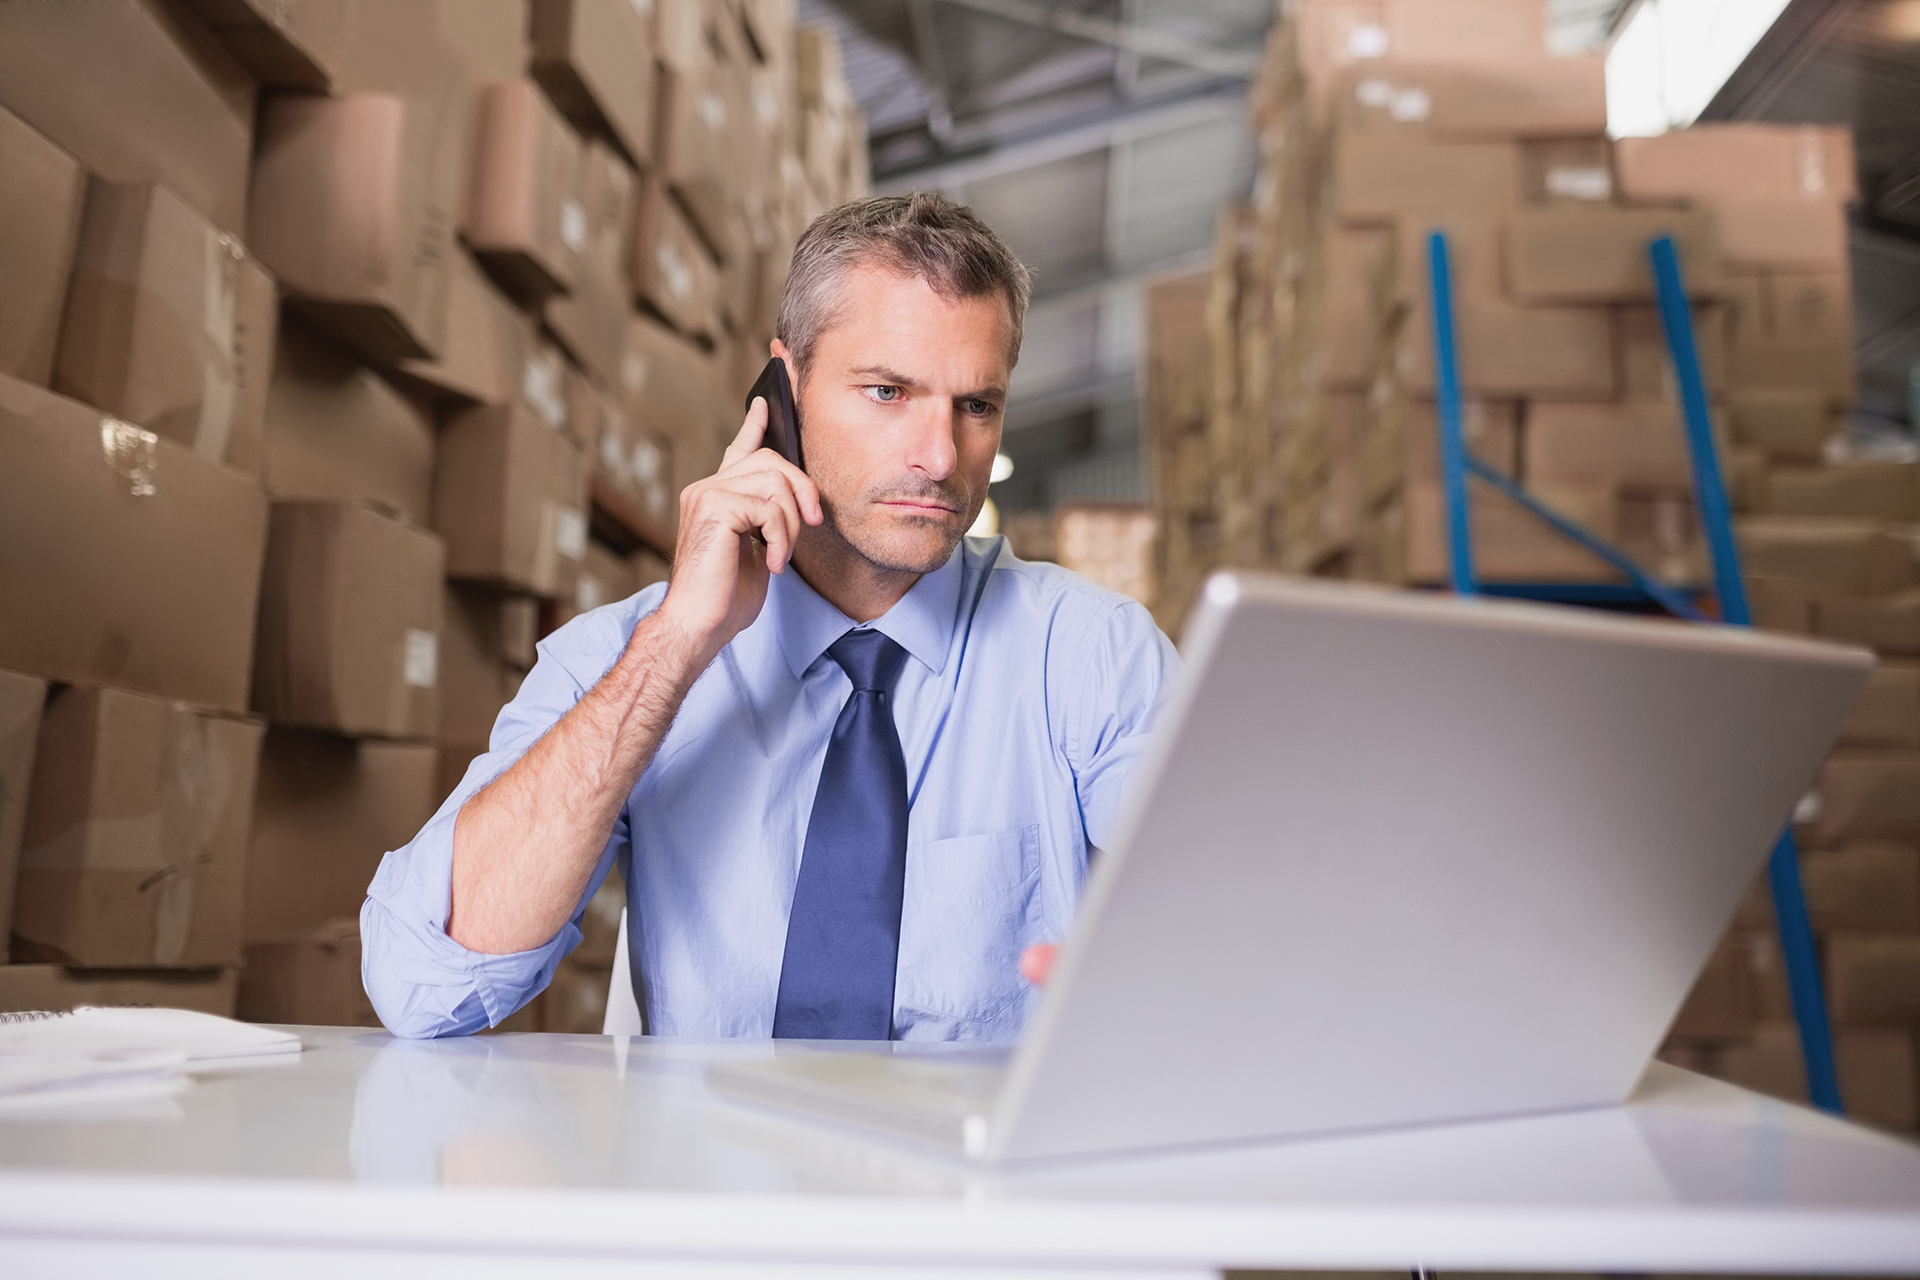 Warehouse manager using mobile phone and laptop at desk